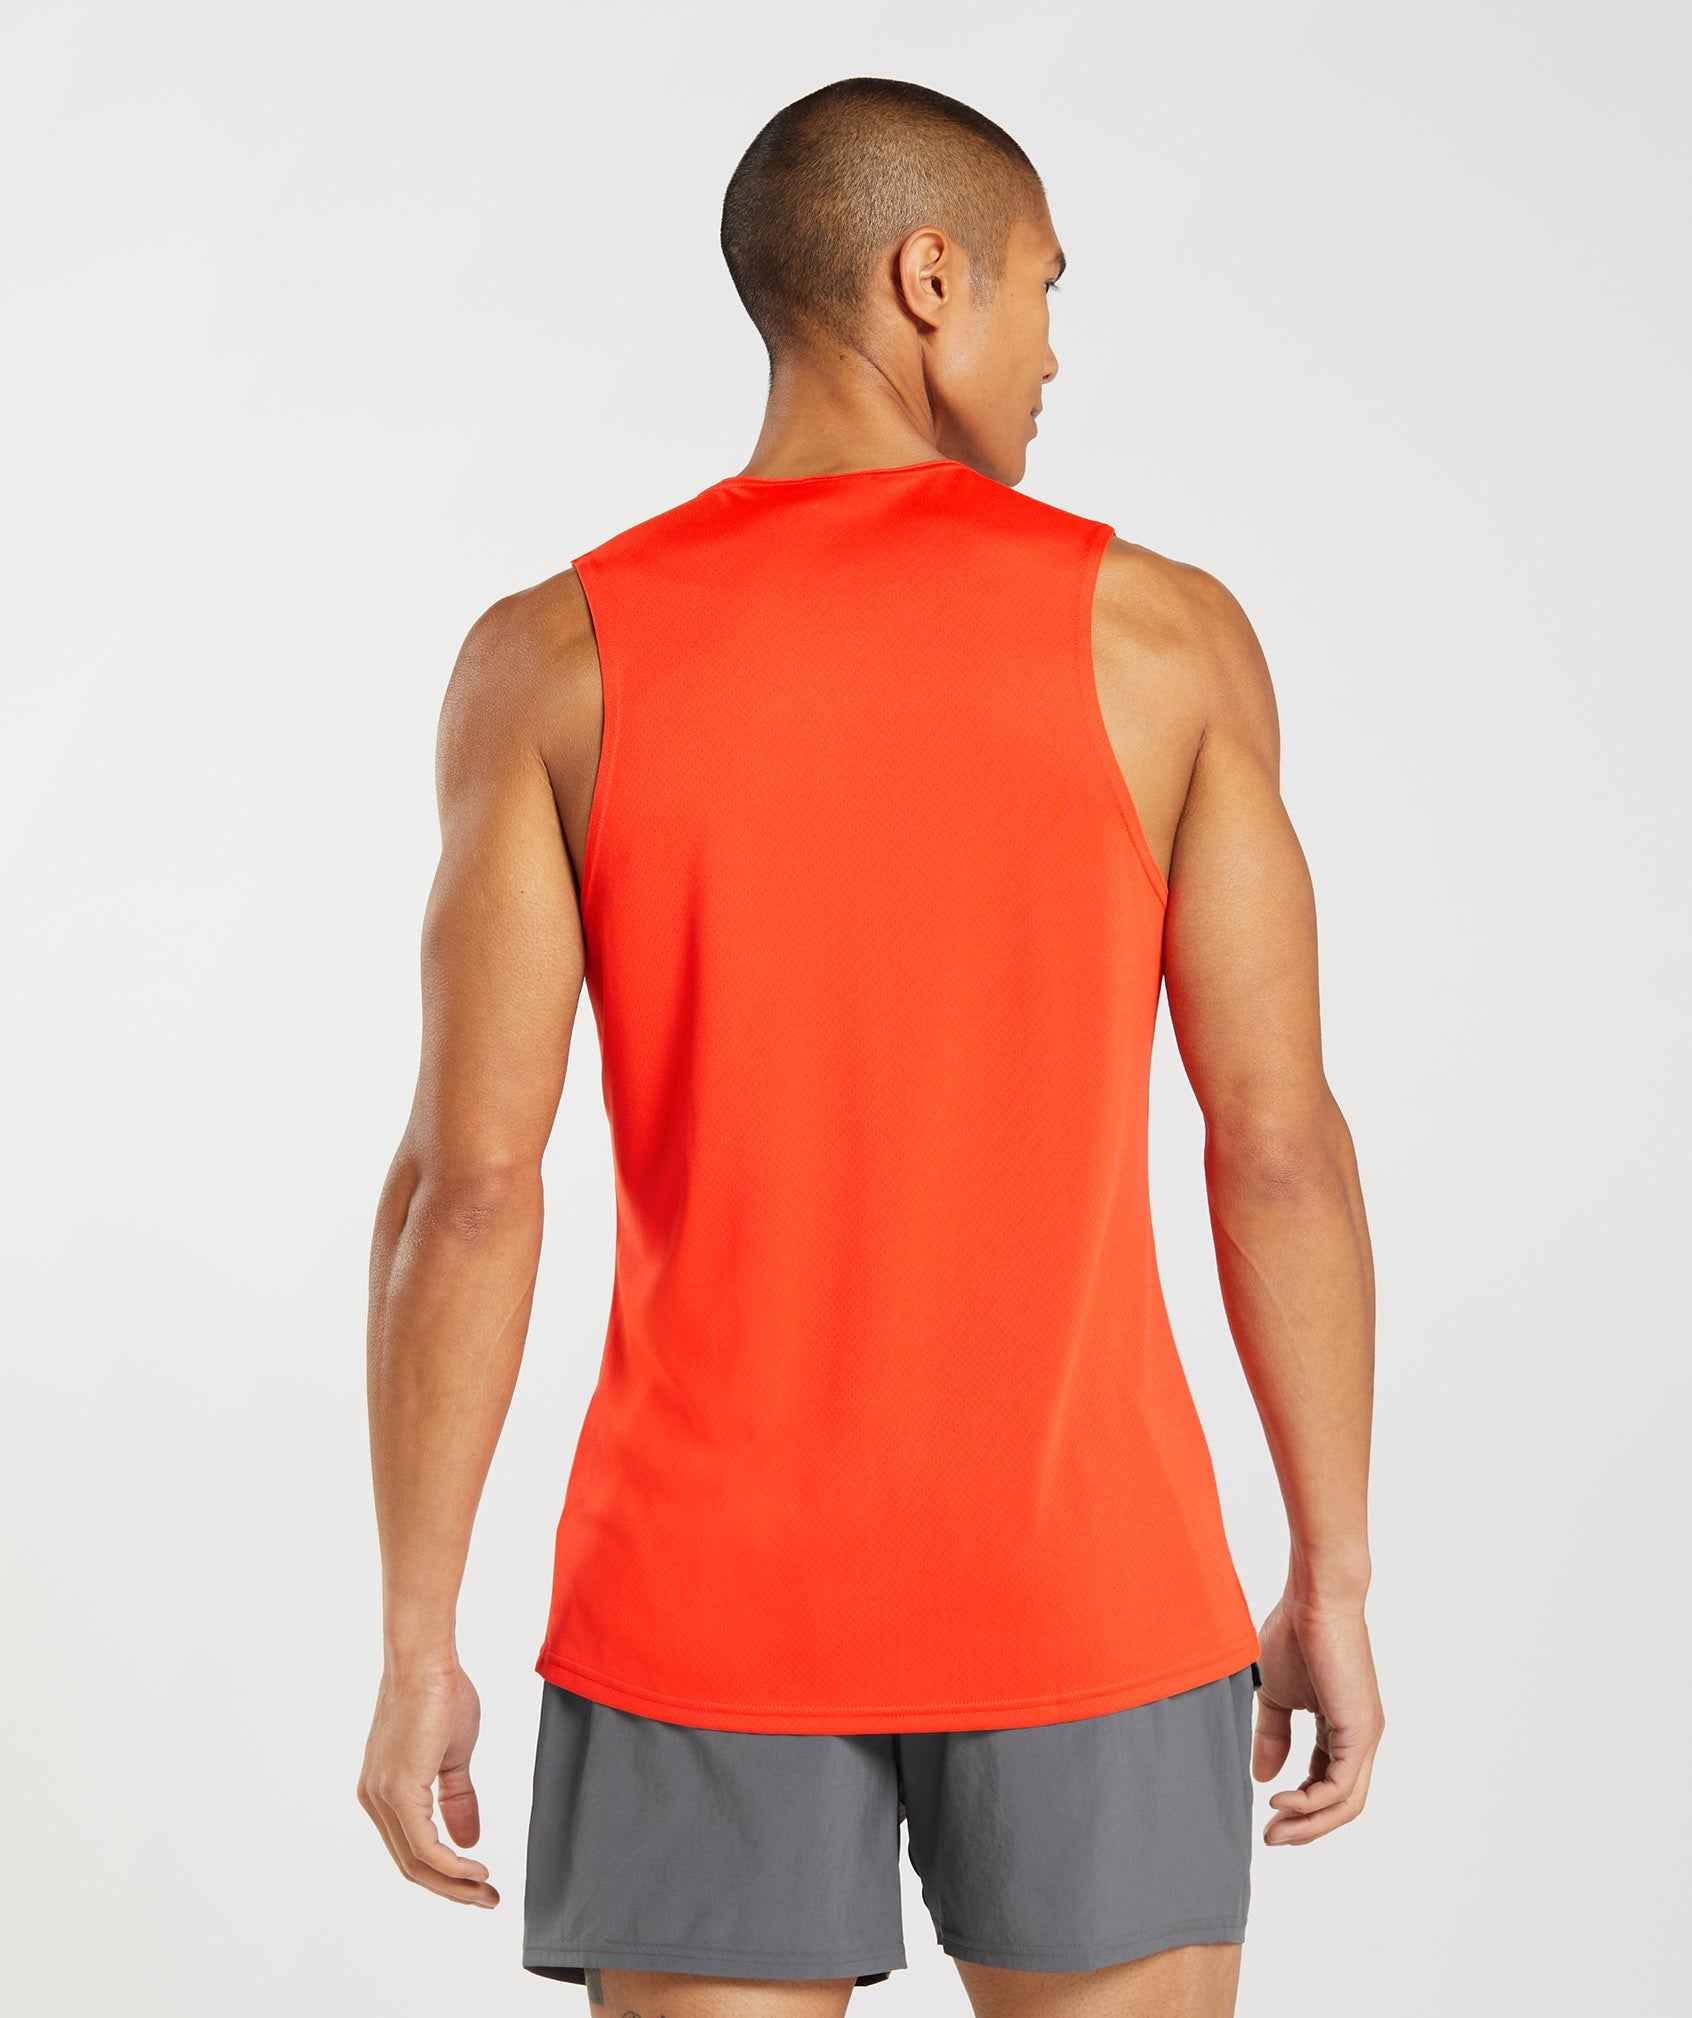 Arrival Tank in Pepper Red - view 2